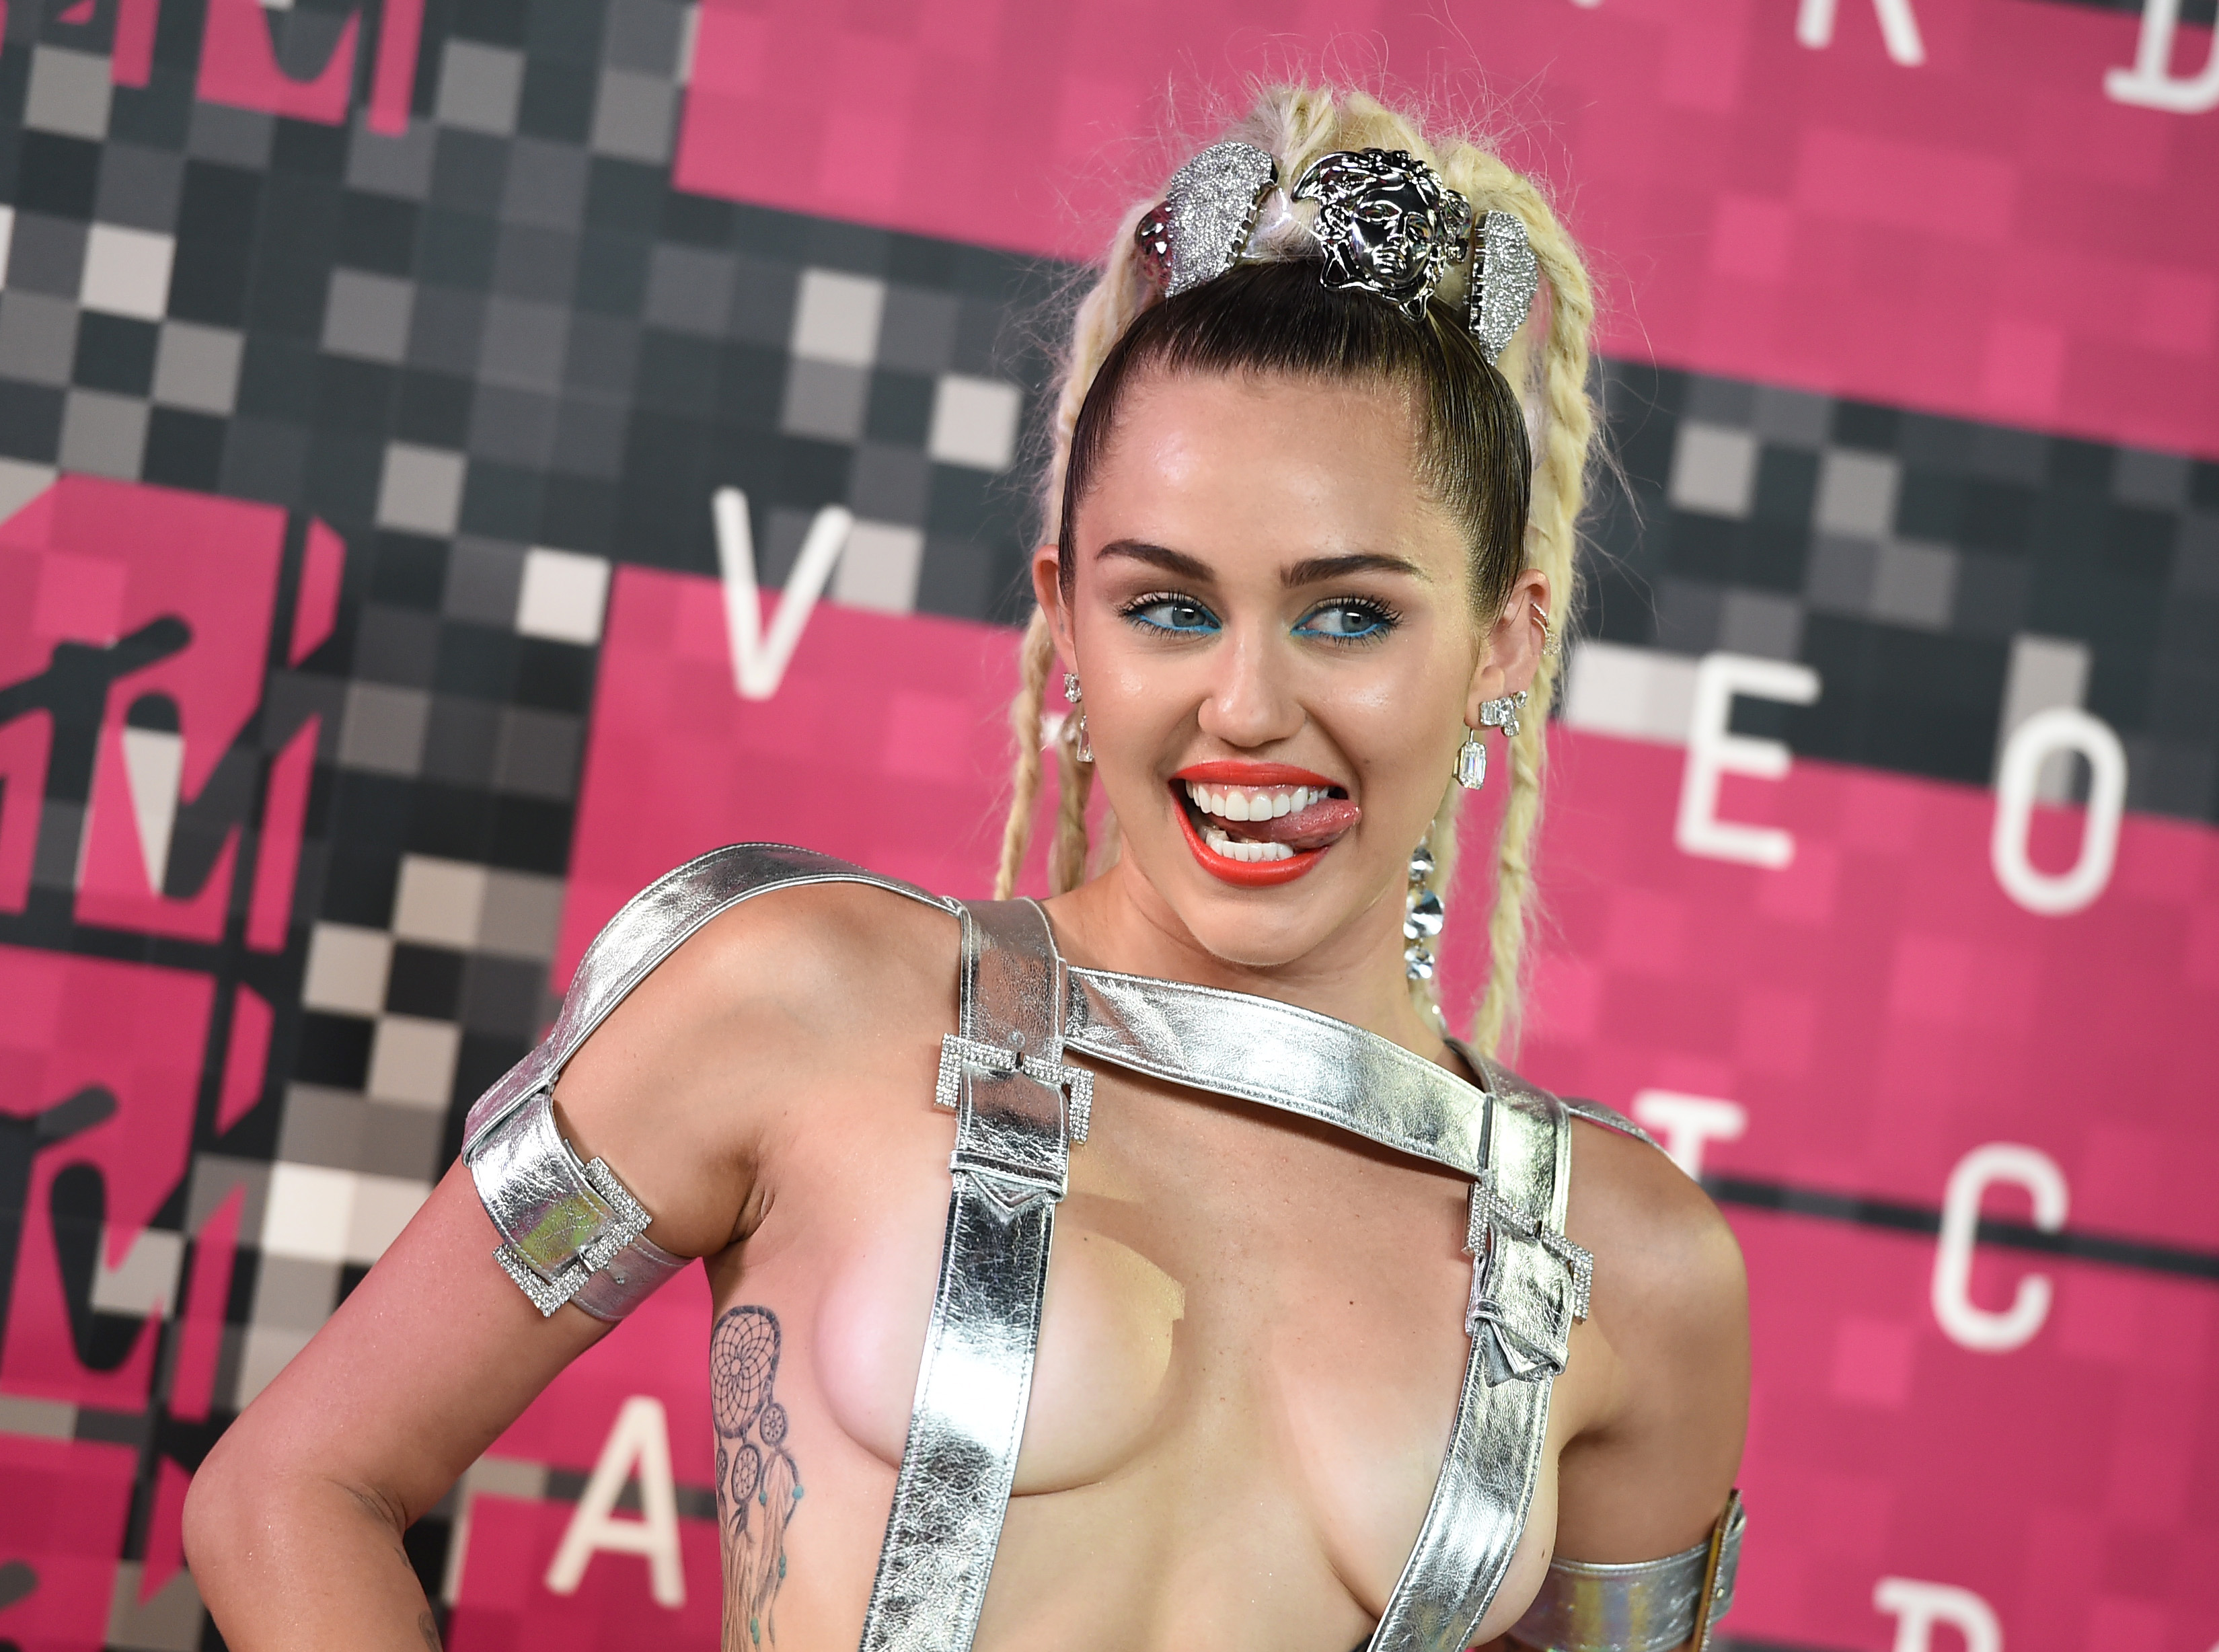 This is what Miley Cyrus wore to the MTV Awards - NZ Herald